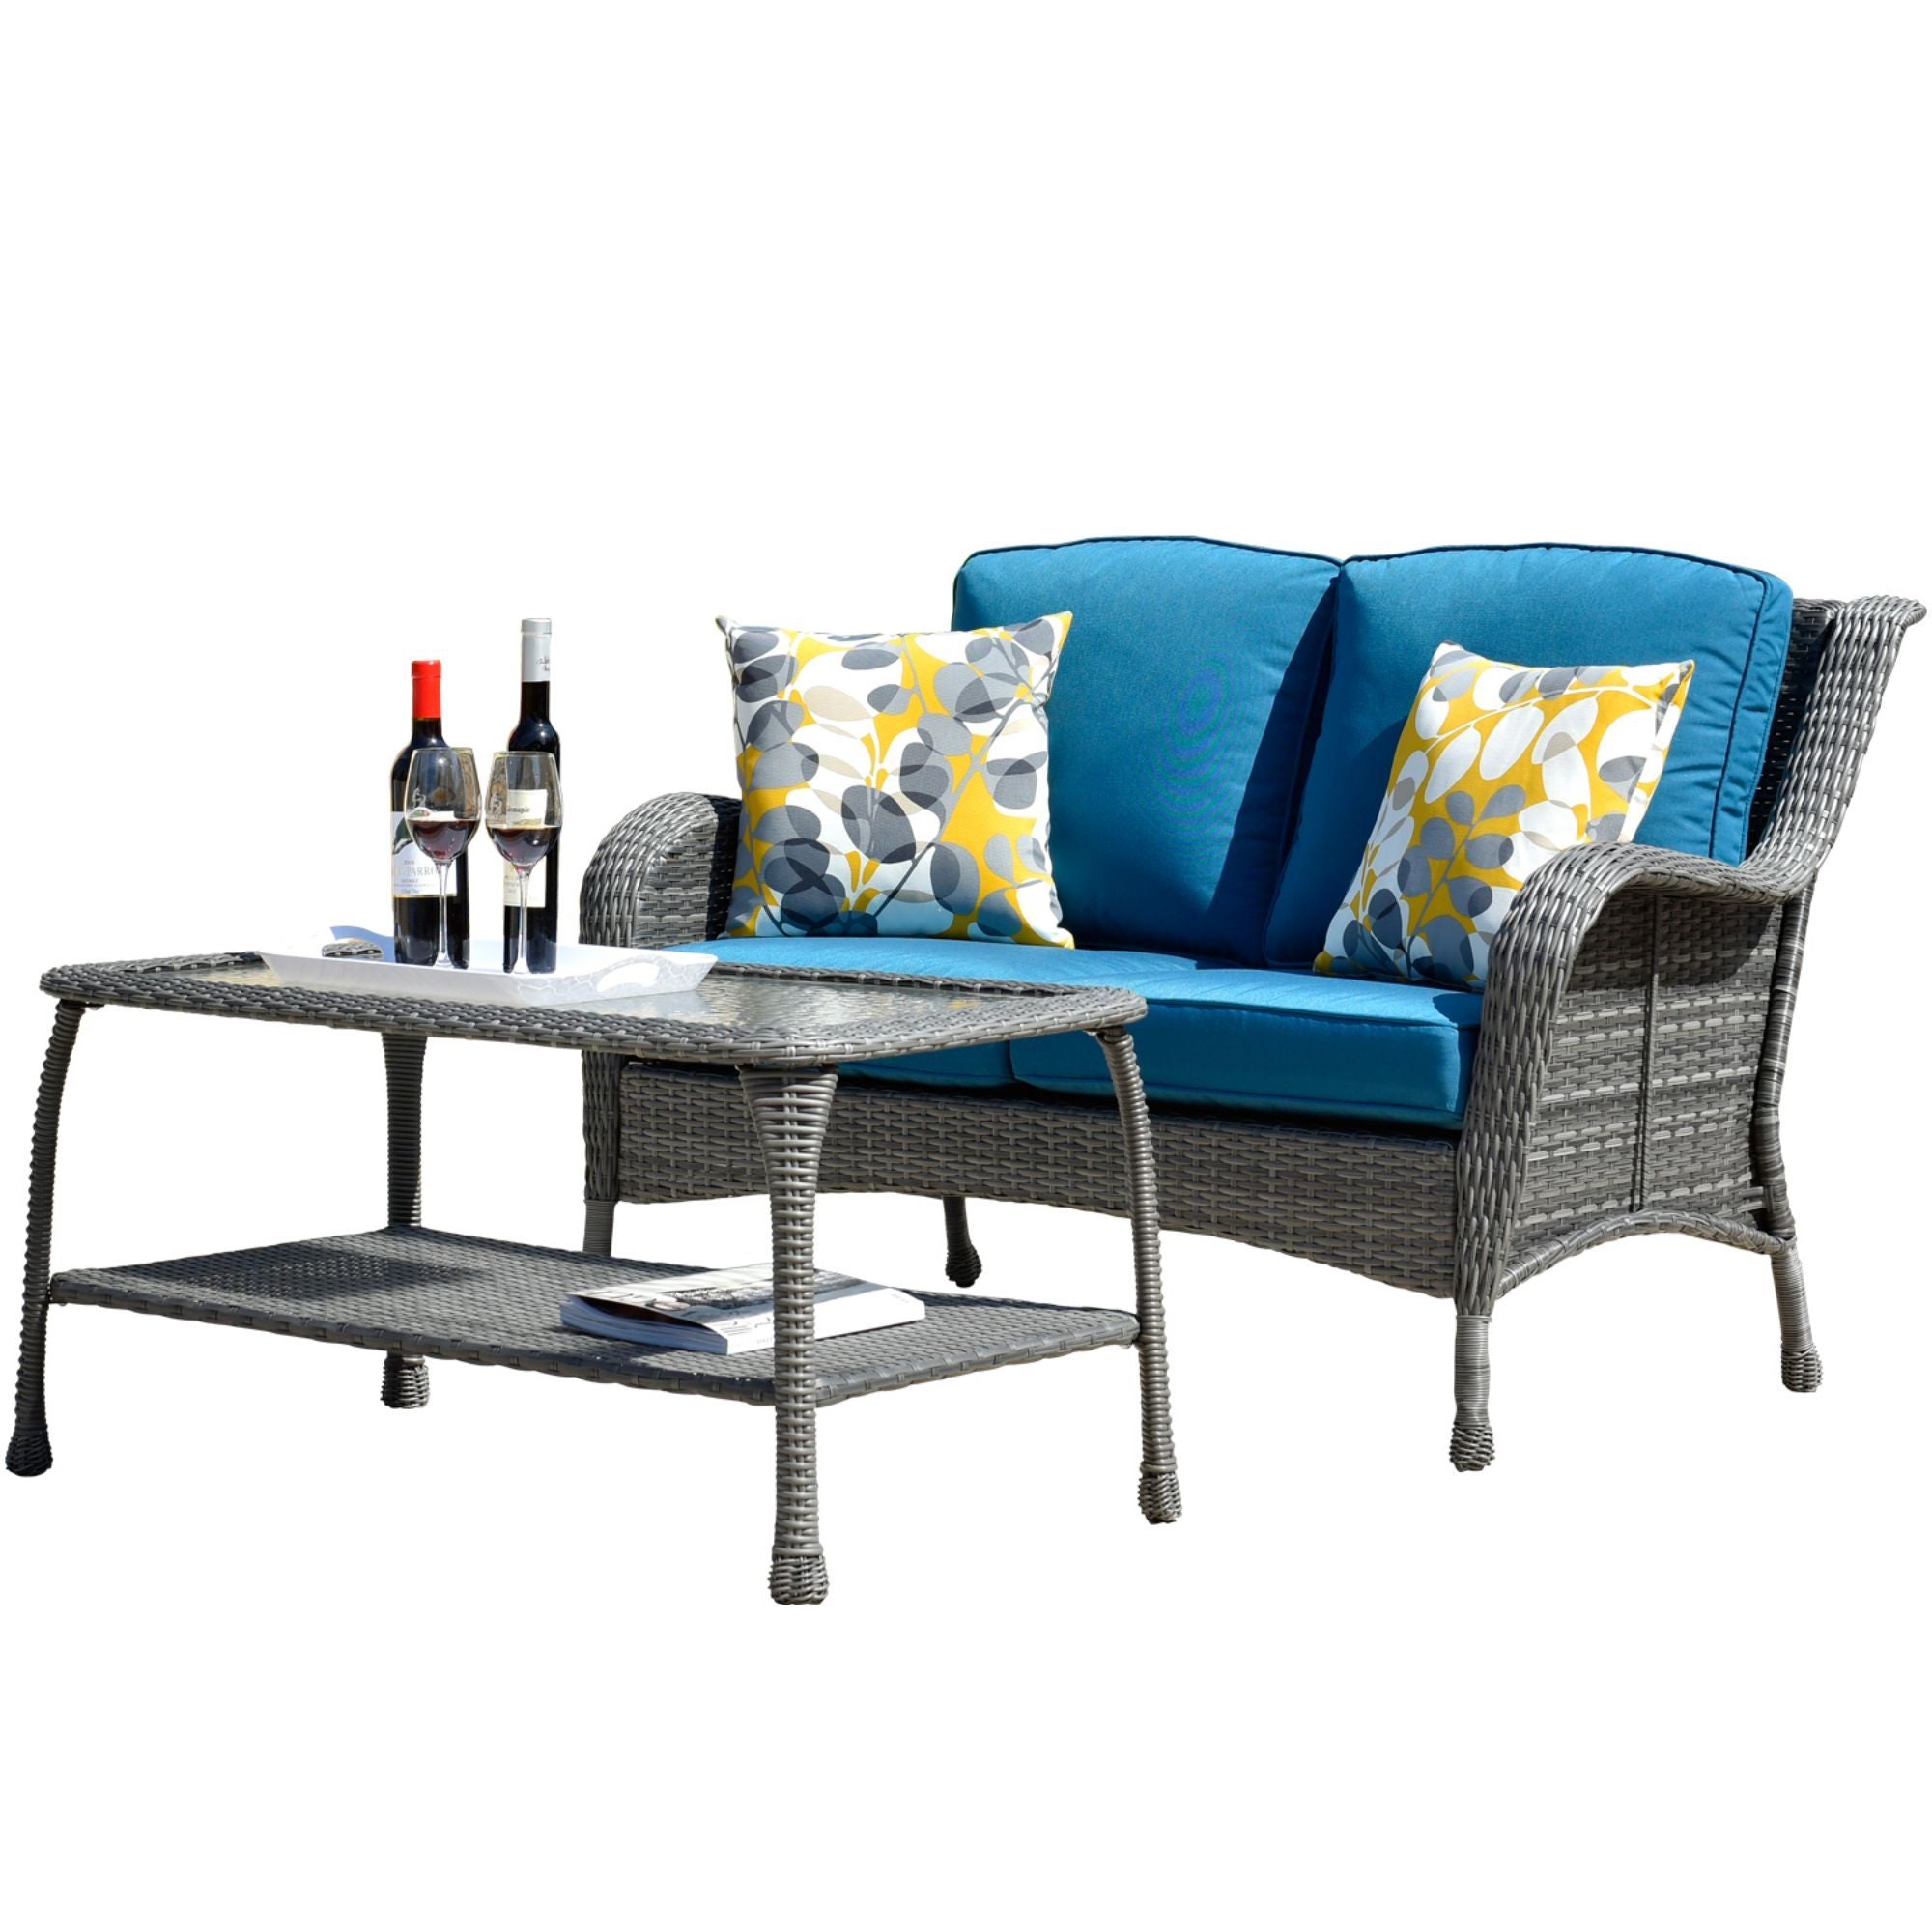 Gray 2-Piece Wicker Rattan Patio Conversation Sectional Set with Blue Cushions